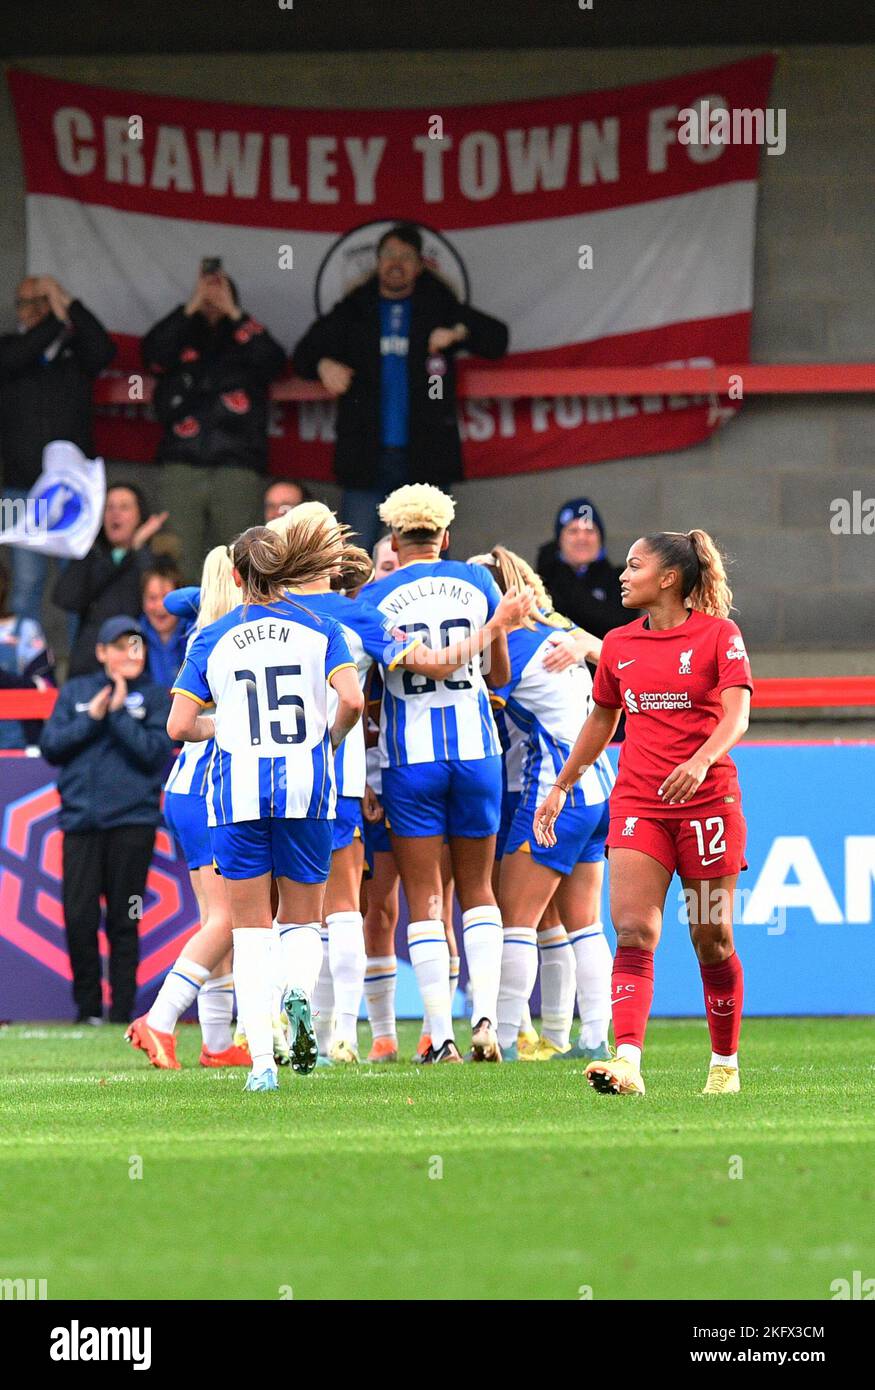 Crawley, UK. 20th Nov, 2022. Brighton players celebrate their goal during the FA Women's Super League match between Brighton & Hove Albion Women and Liverpool Women at The People's Pension Stadium on November 20th 2022 in Crawley, United Kingdom. (Photo by Jeff Mood/phcimages.com) Credit: PHC Images/Alamy Live News Stock Photo